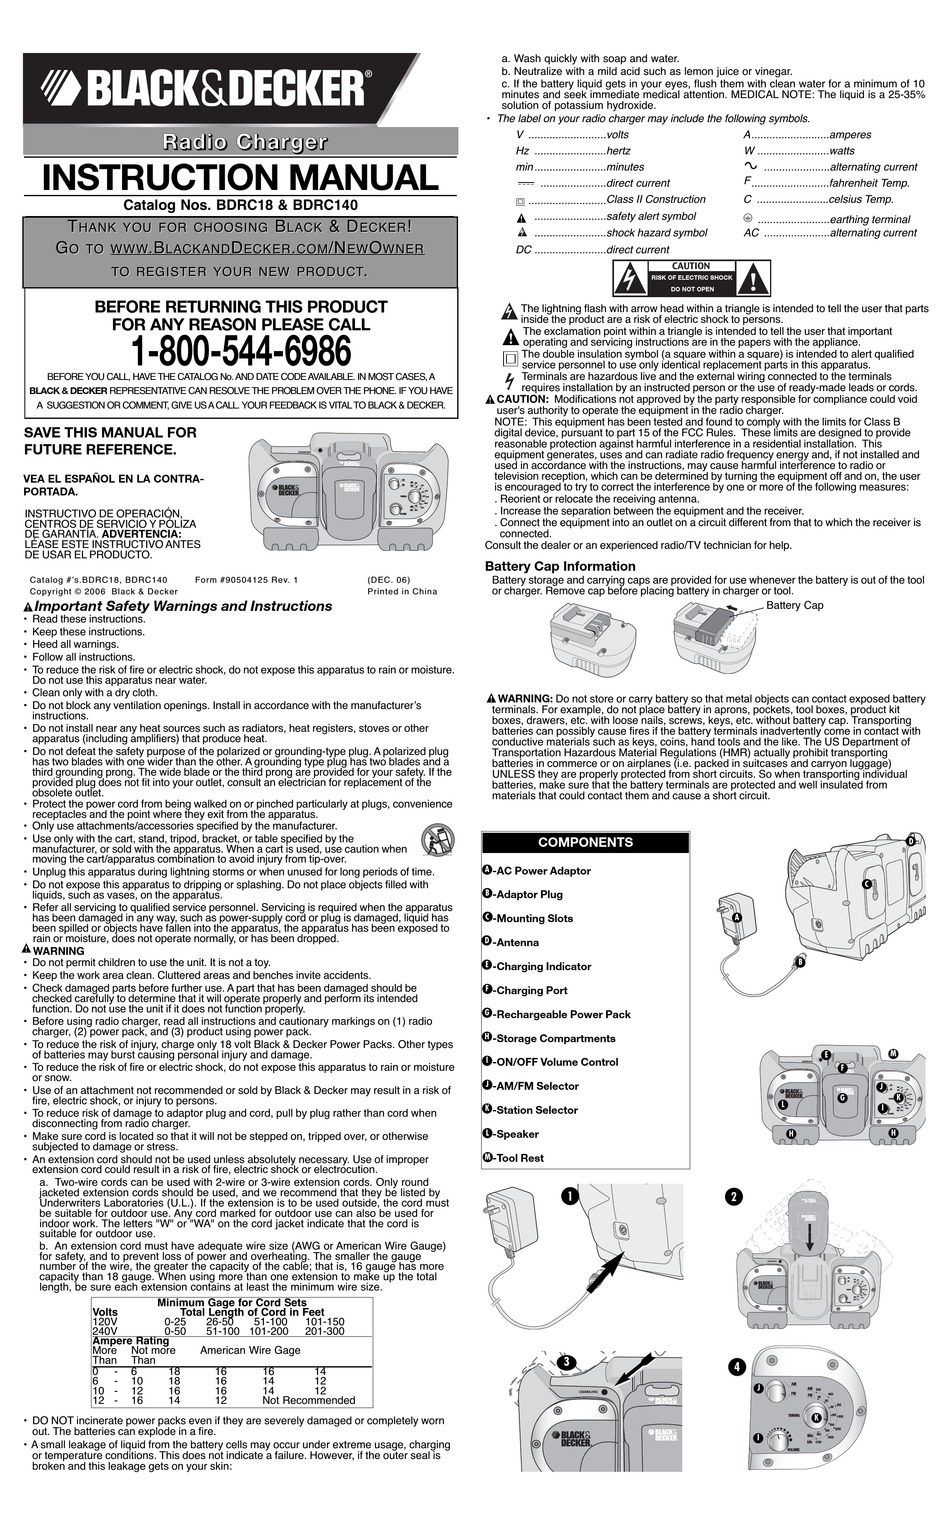 User manual Black & Decker MTRT8 (English - 100 pages)